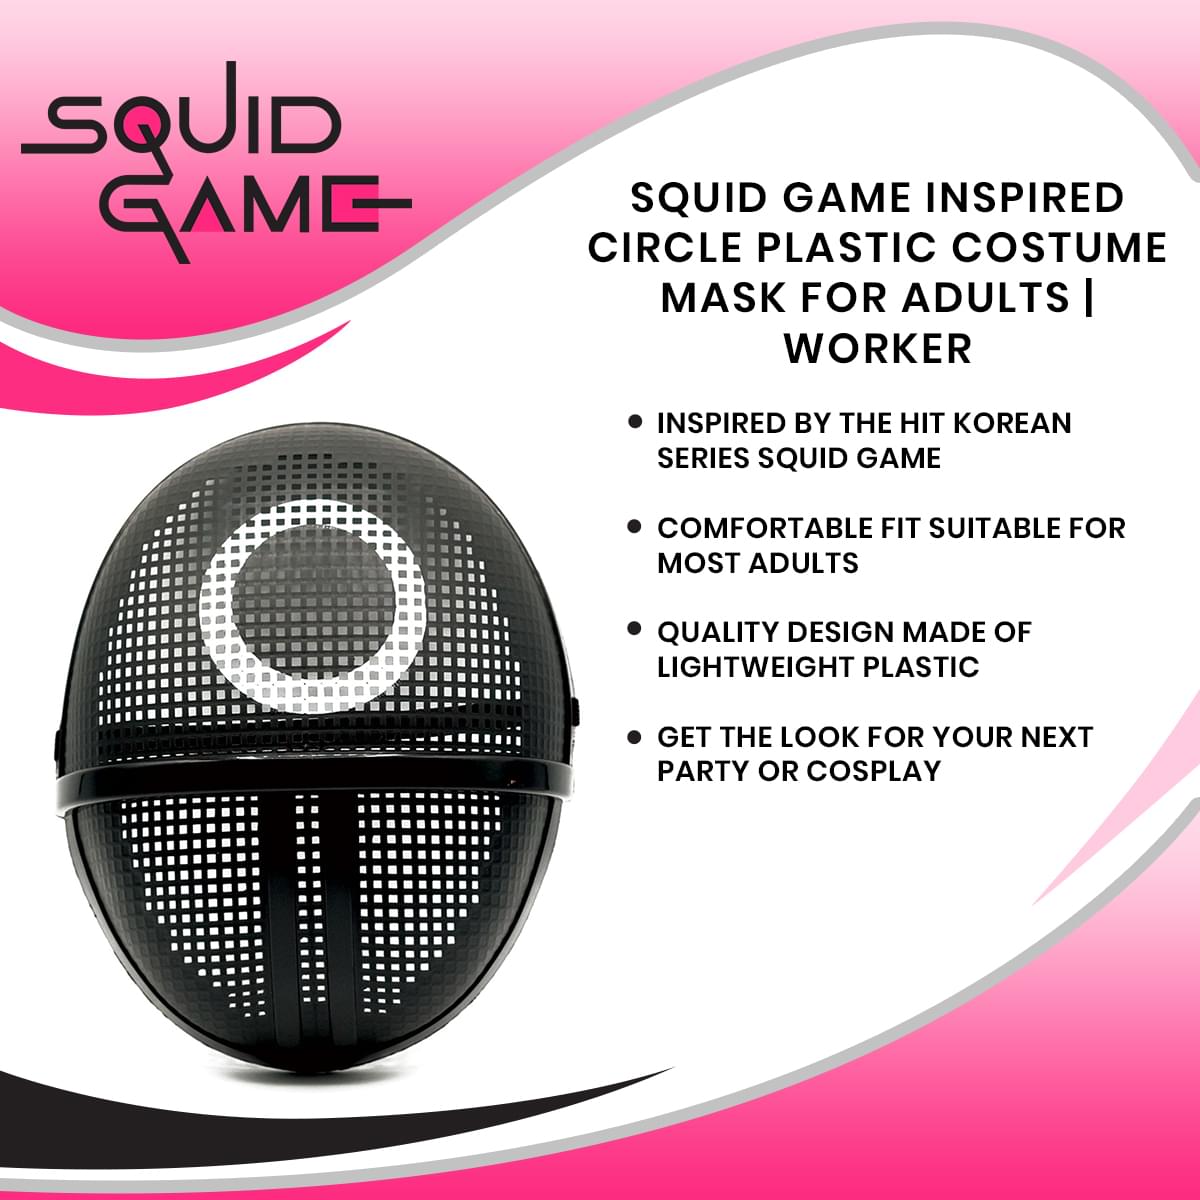 Squid Game Inspired Circle Plastic Costume Mask for Adults | Worker